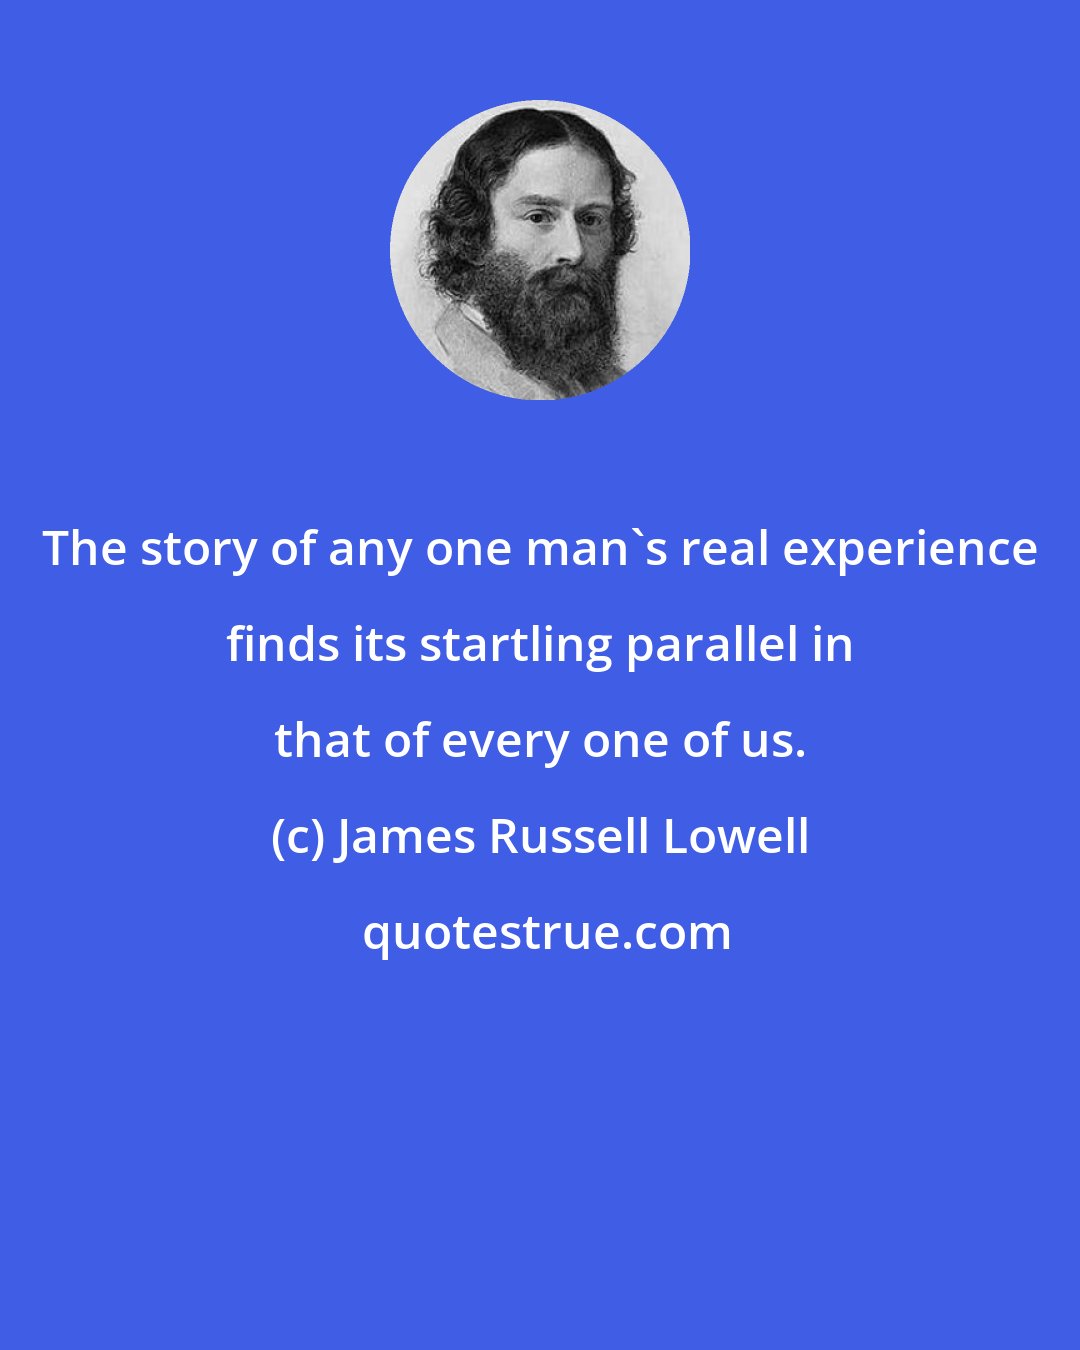 James Russell Lowell: The story of any one man's real experience finds its startling parallel in that of every one of us.